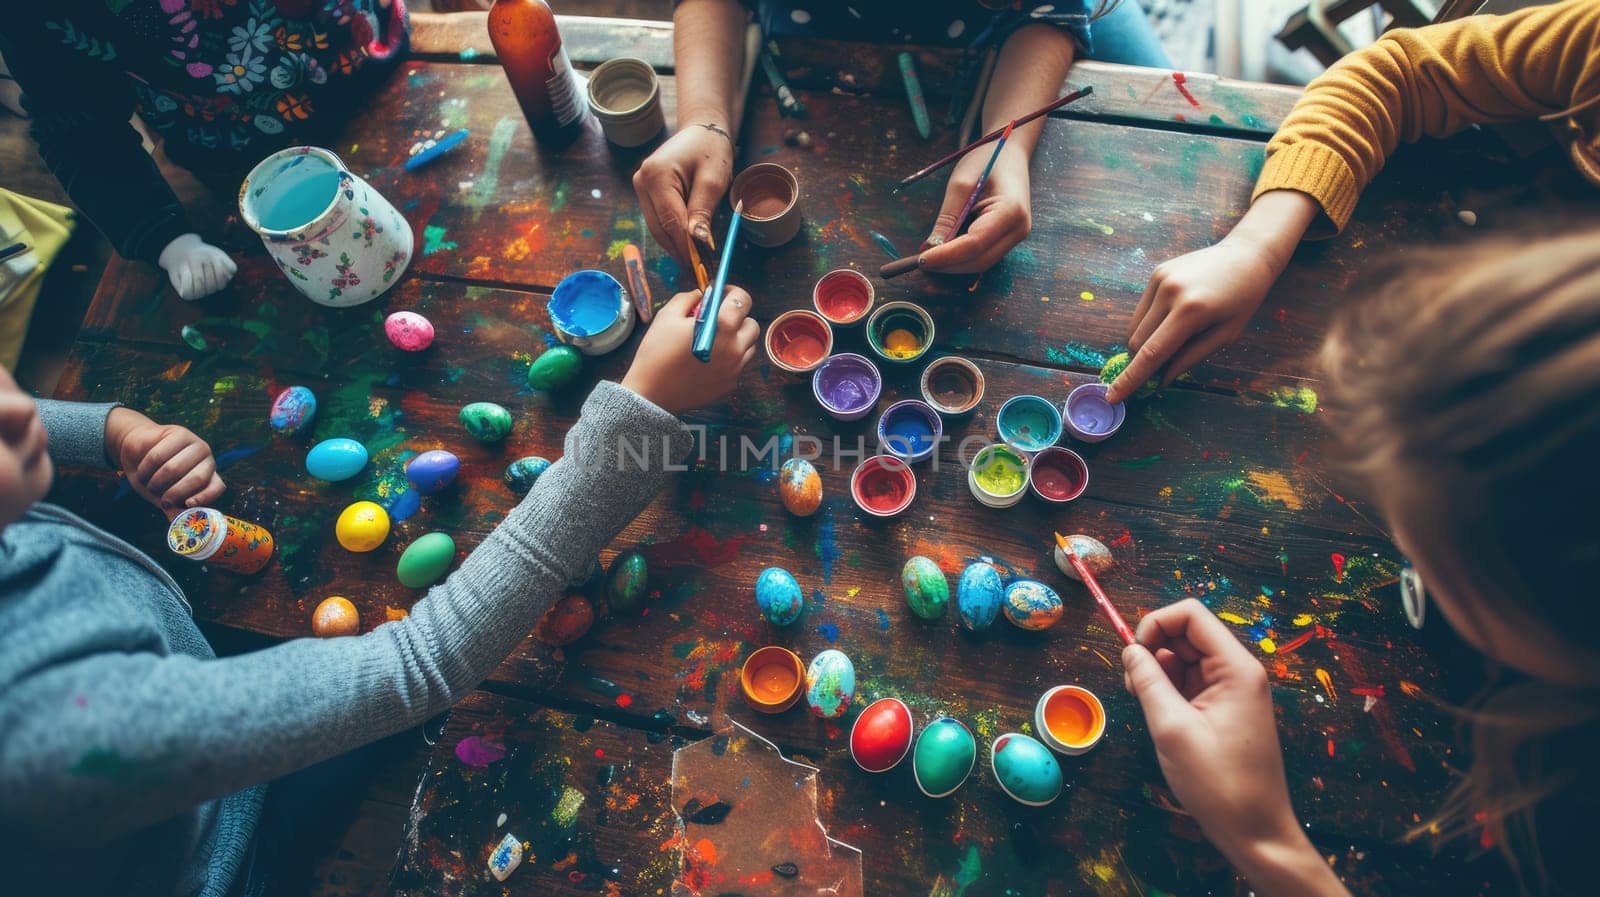 A group of children are gathered around a table, engaging in the leisure activity of decorating Easter eggs. This fun art event combines recreation, visual arts, and play in a circle of excitement AIG42E